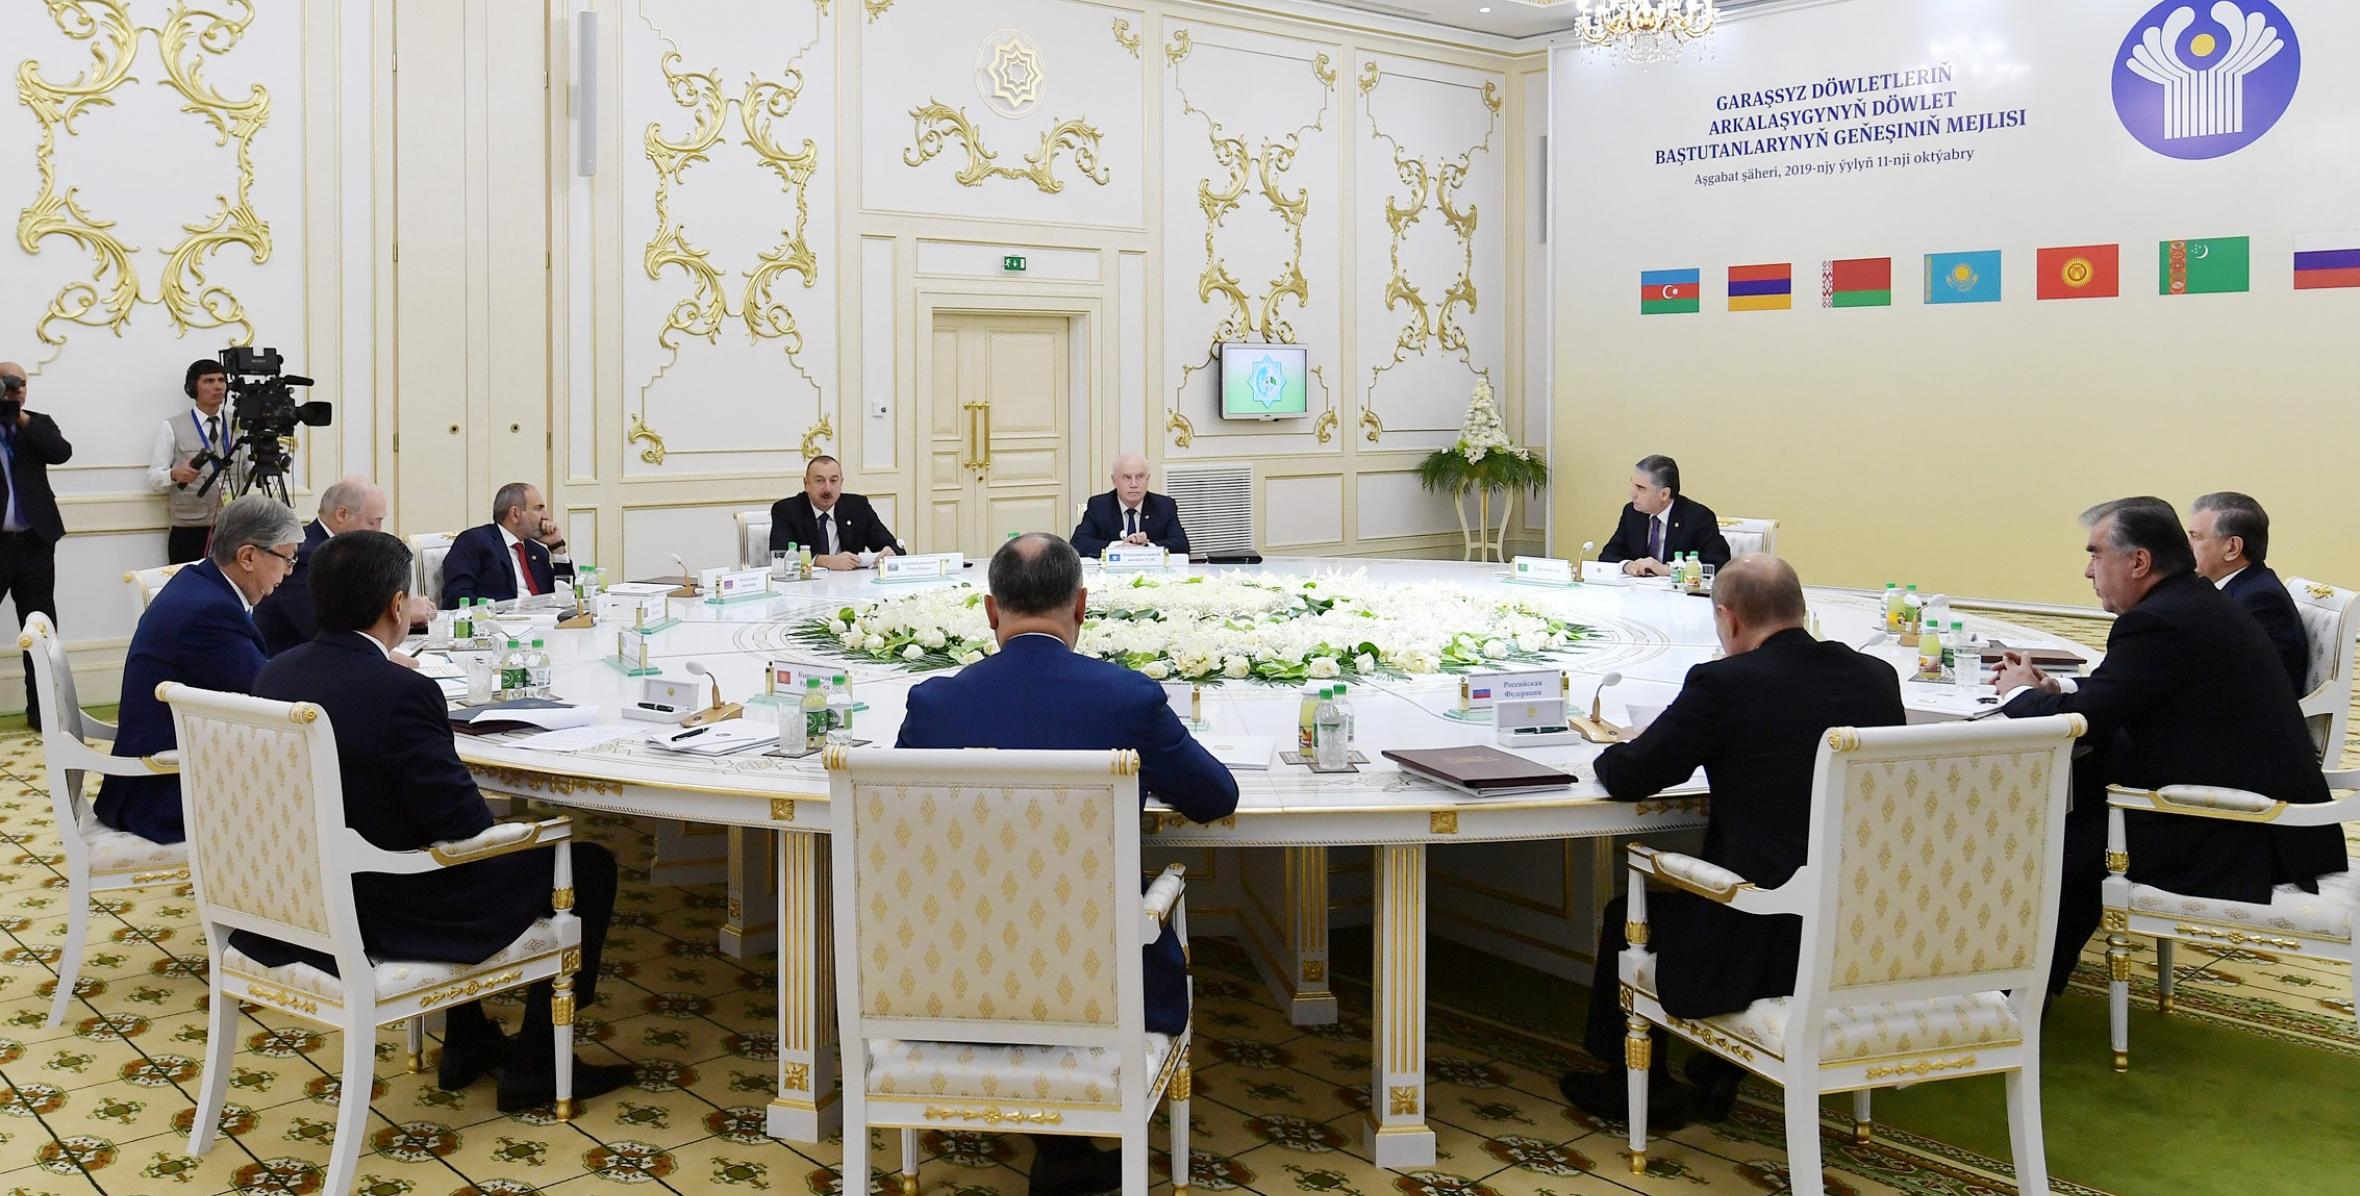 Ilham Aliyev attended CIS Heads of State Council's session in limited format in Ashgabat